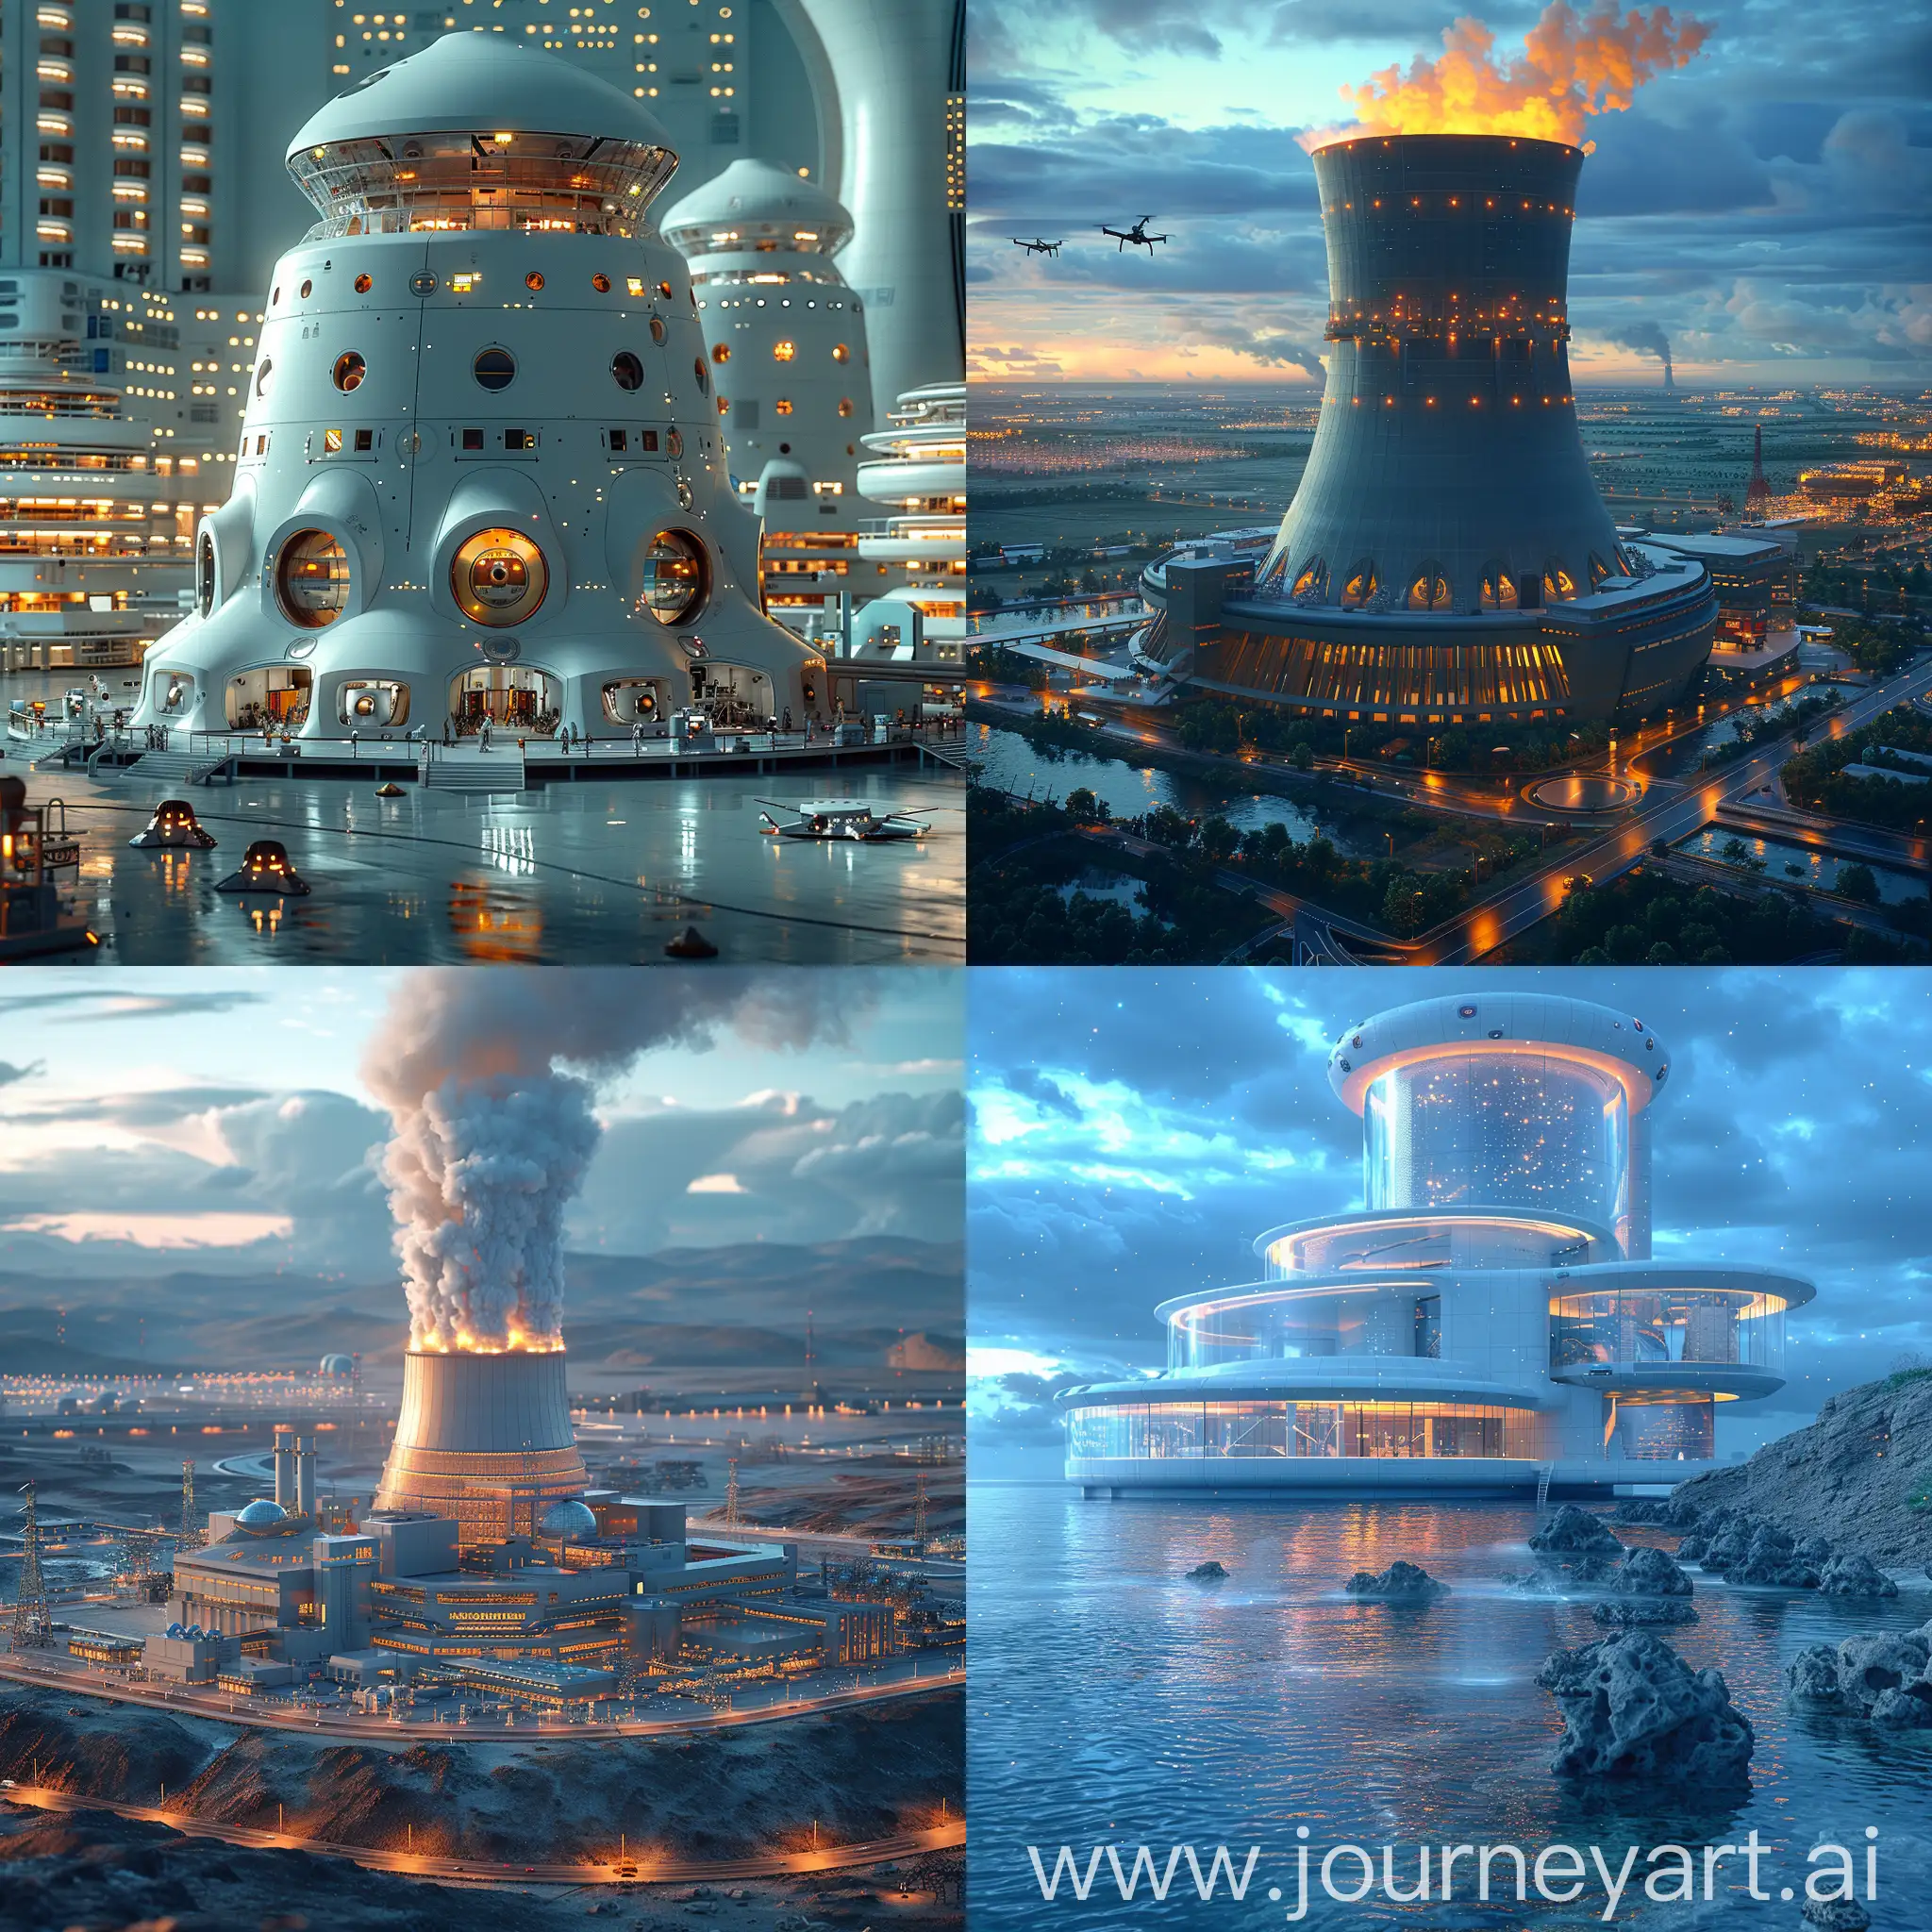 Innovative-Futuristic-Nuclear-Power-Plant-with-Advanced-Reactor-Design-and-Green-Technologies